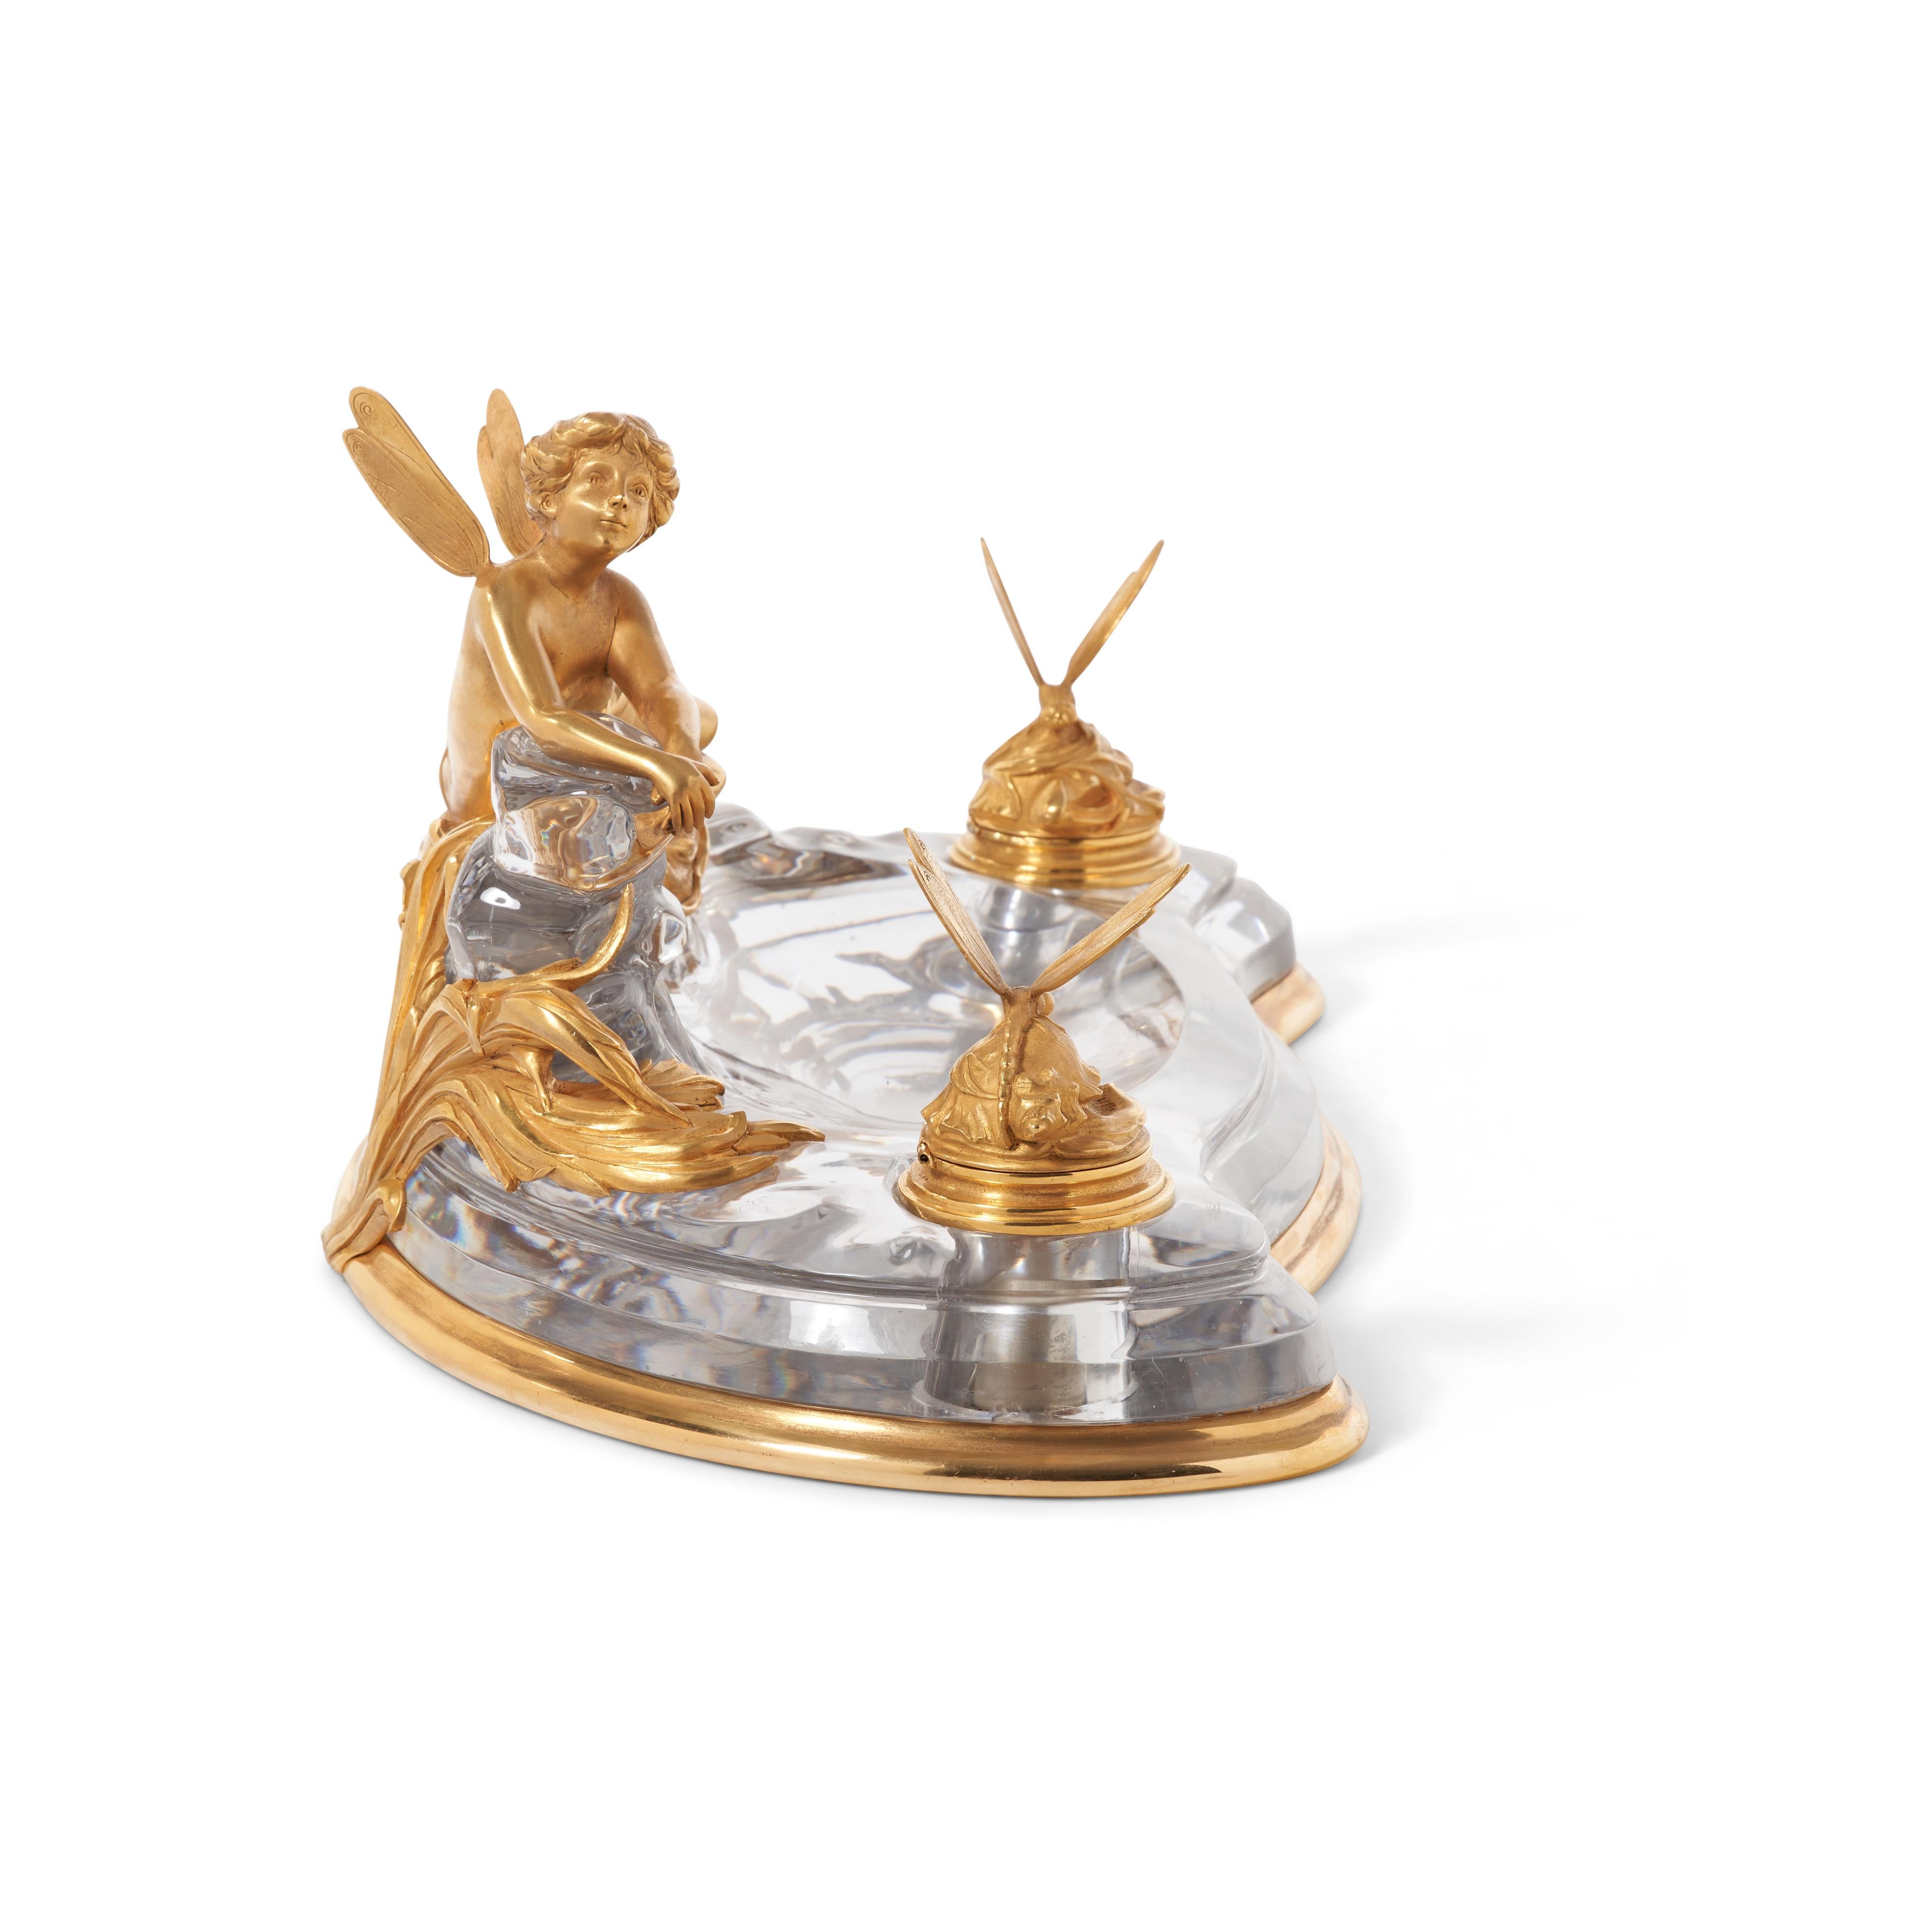 Rare Art Nouveau French Ormolu and Crystal Inkwell Encrier by Baccarat In Good Condition For Sale In New York, NY